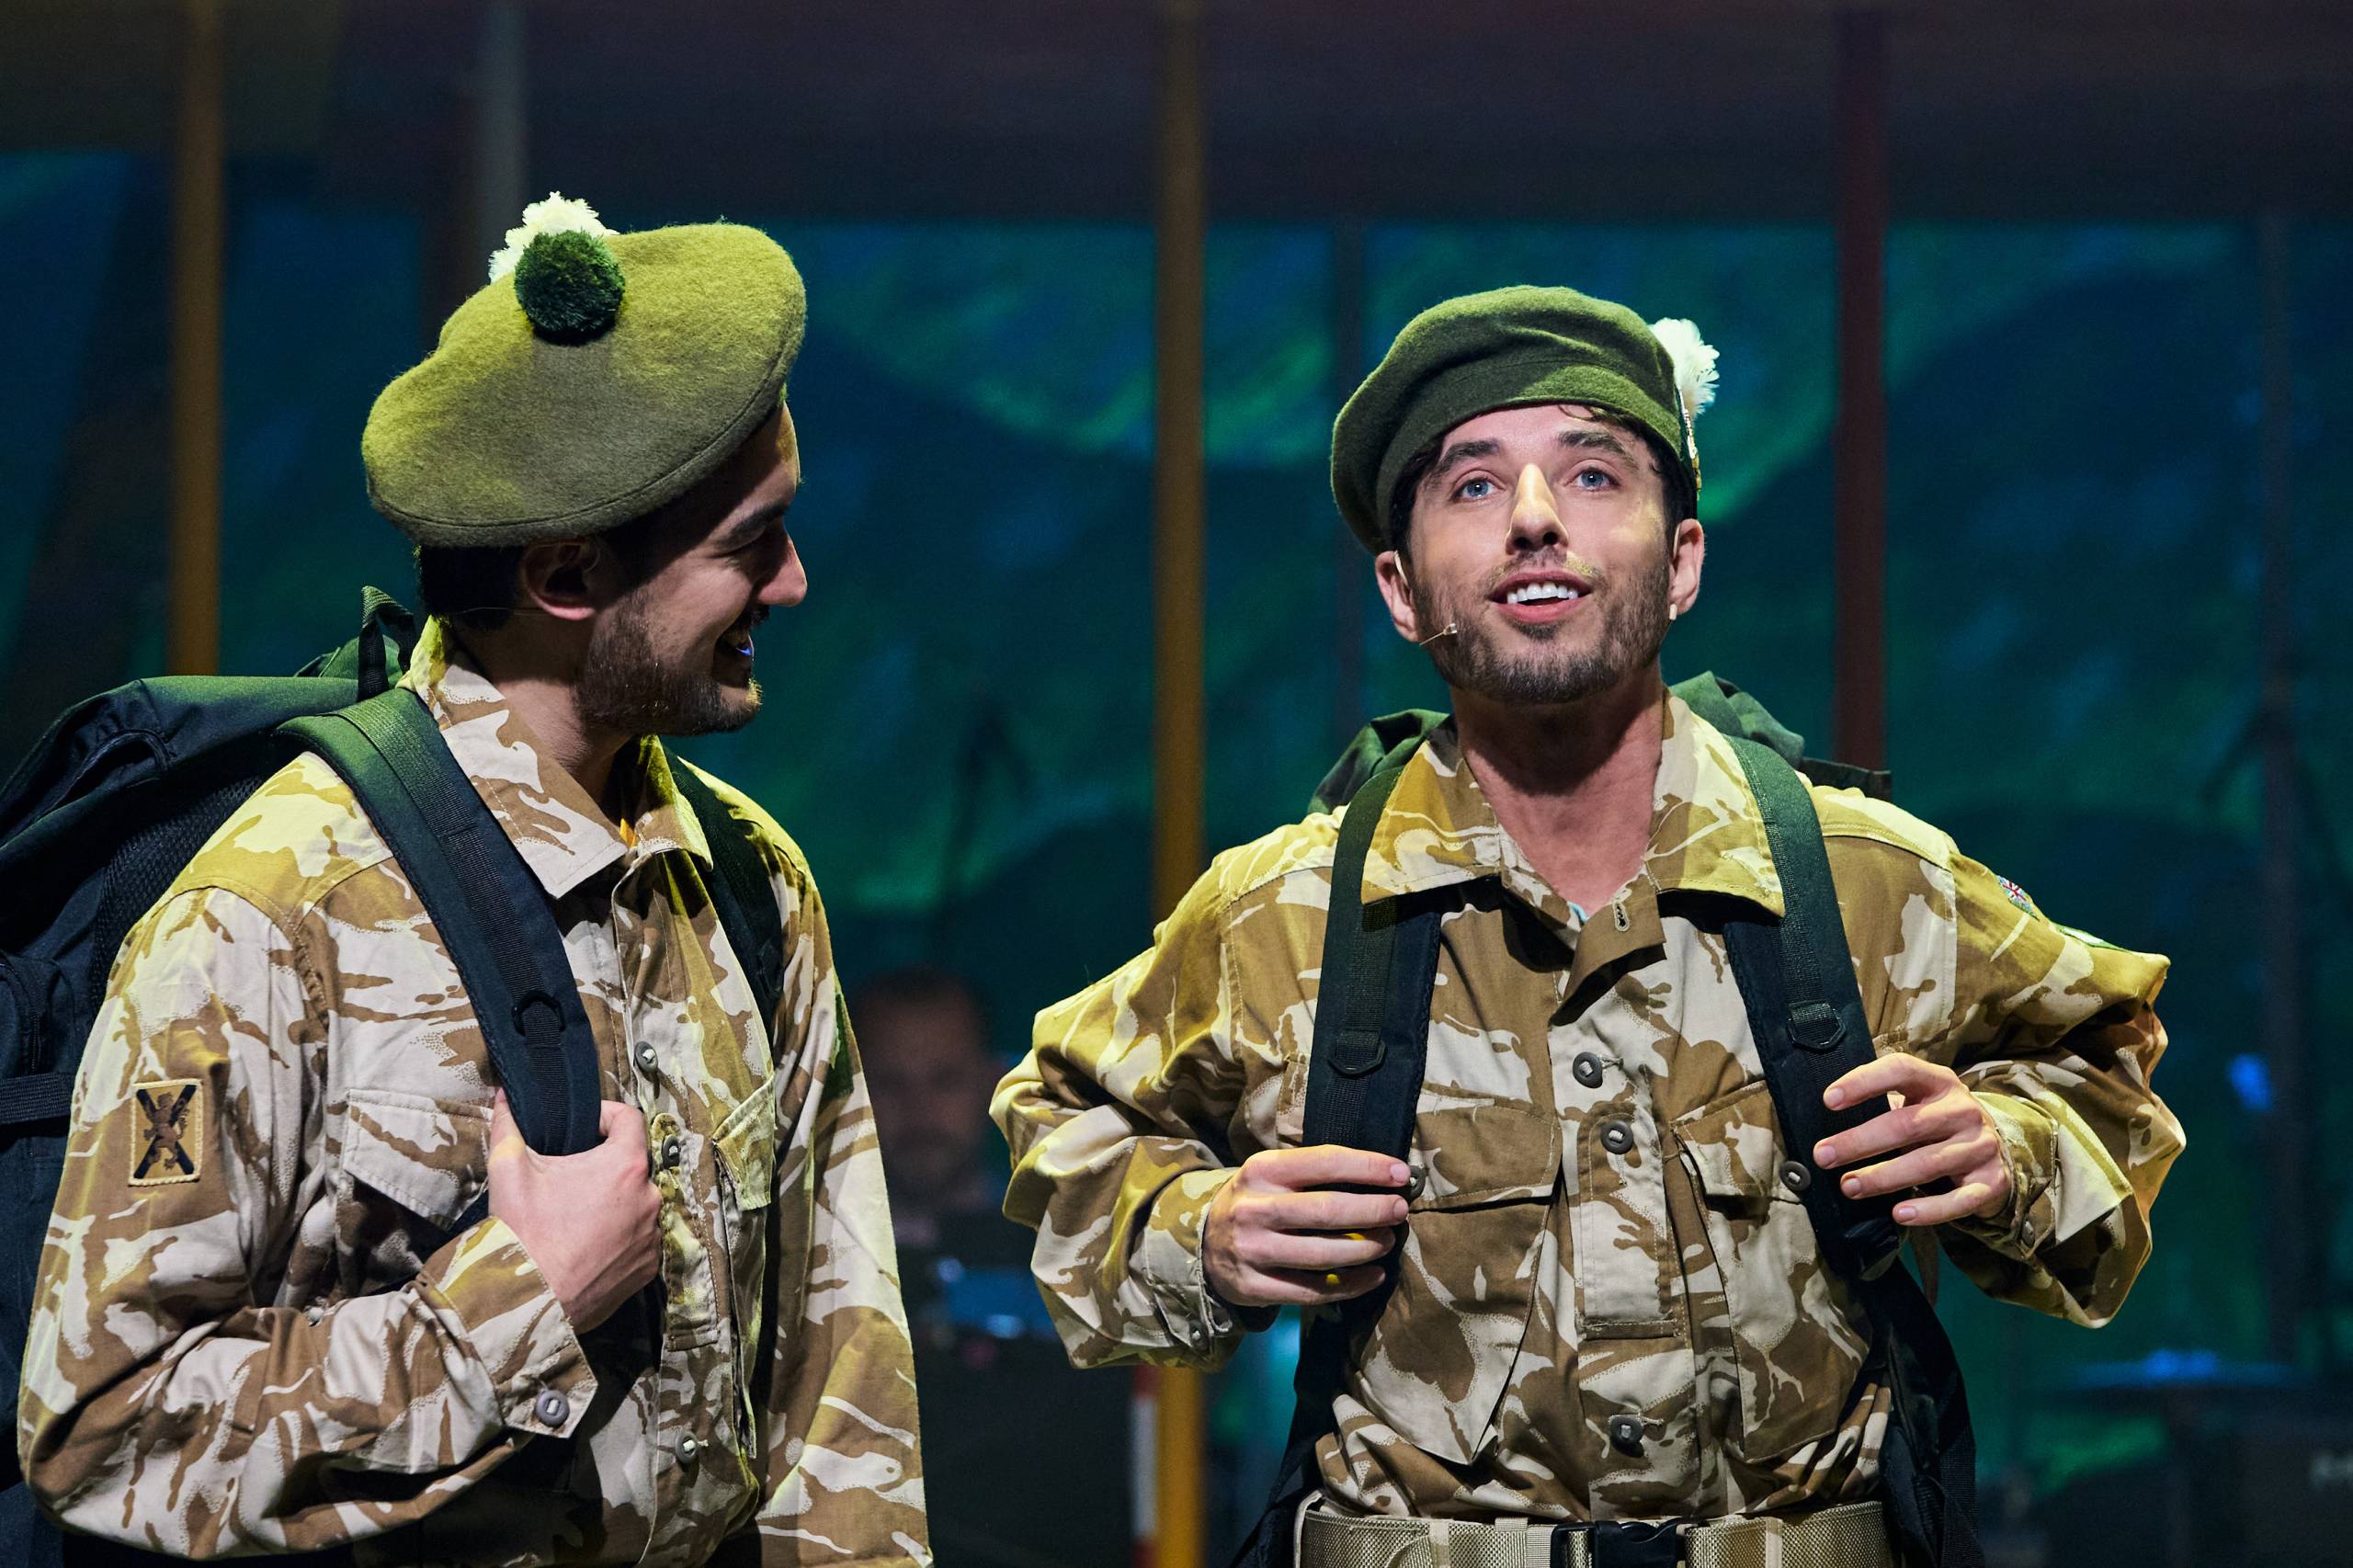 2 people on stage dressed in army uniform.